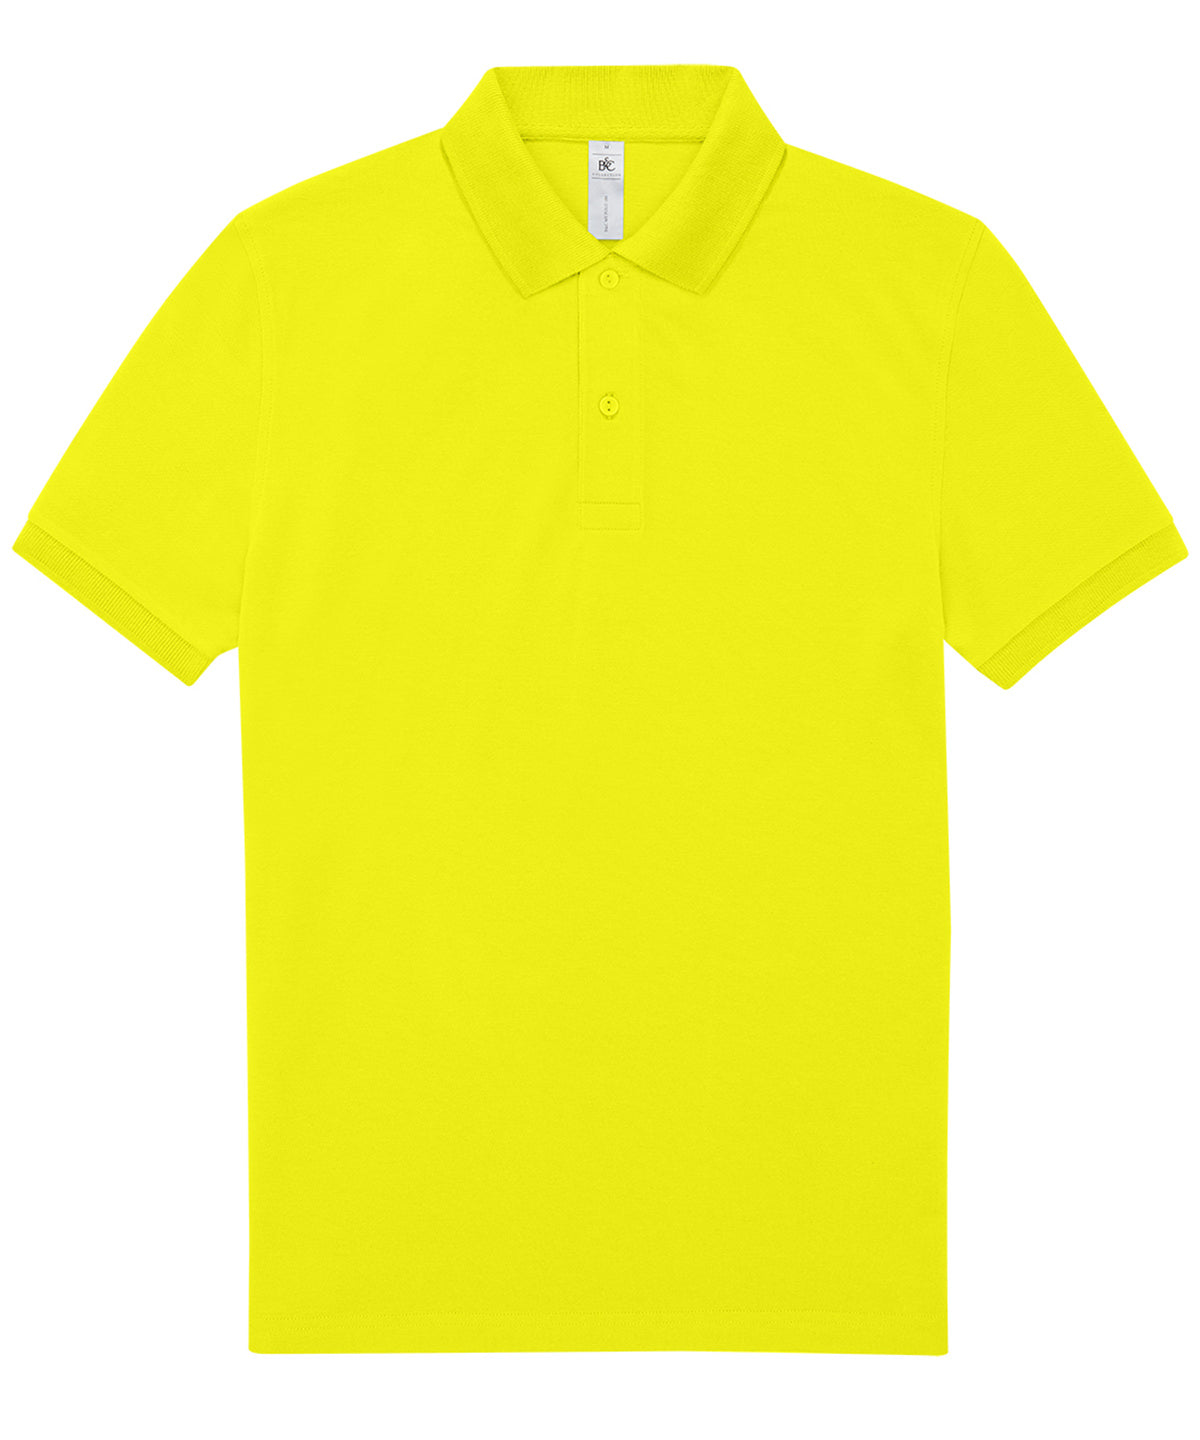 Personalised Polo Shirts - Lime B&C Collection B&C My Polo 180